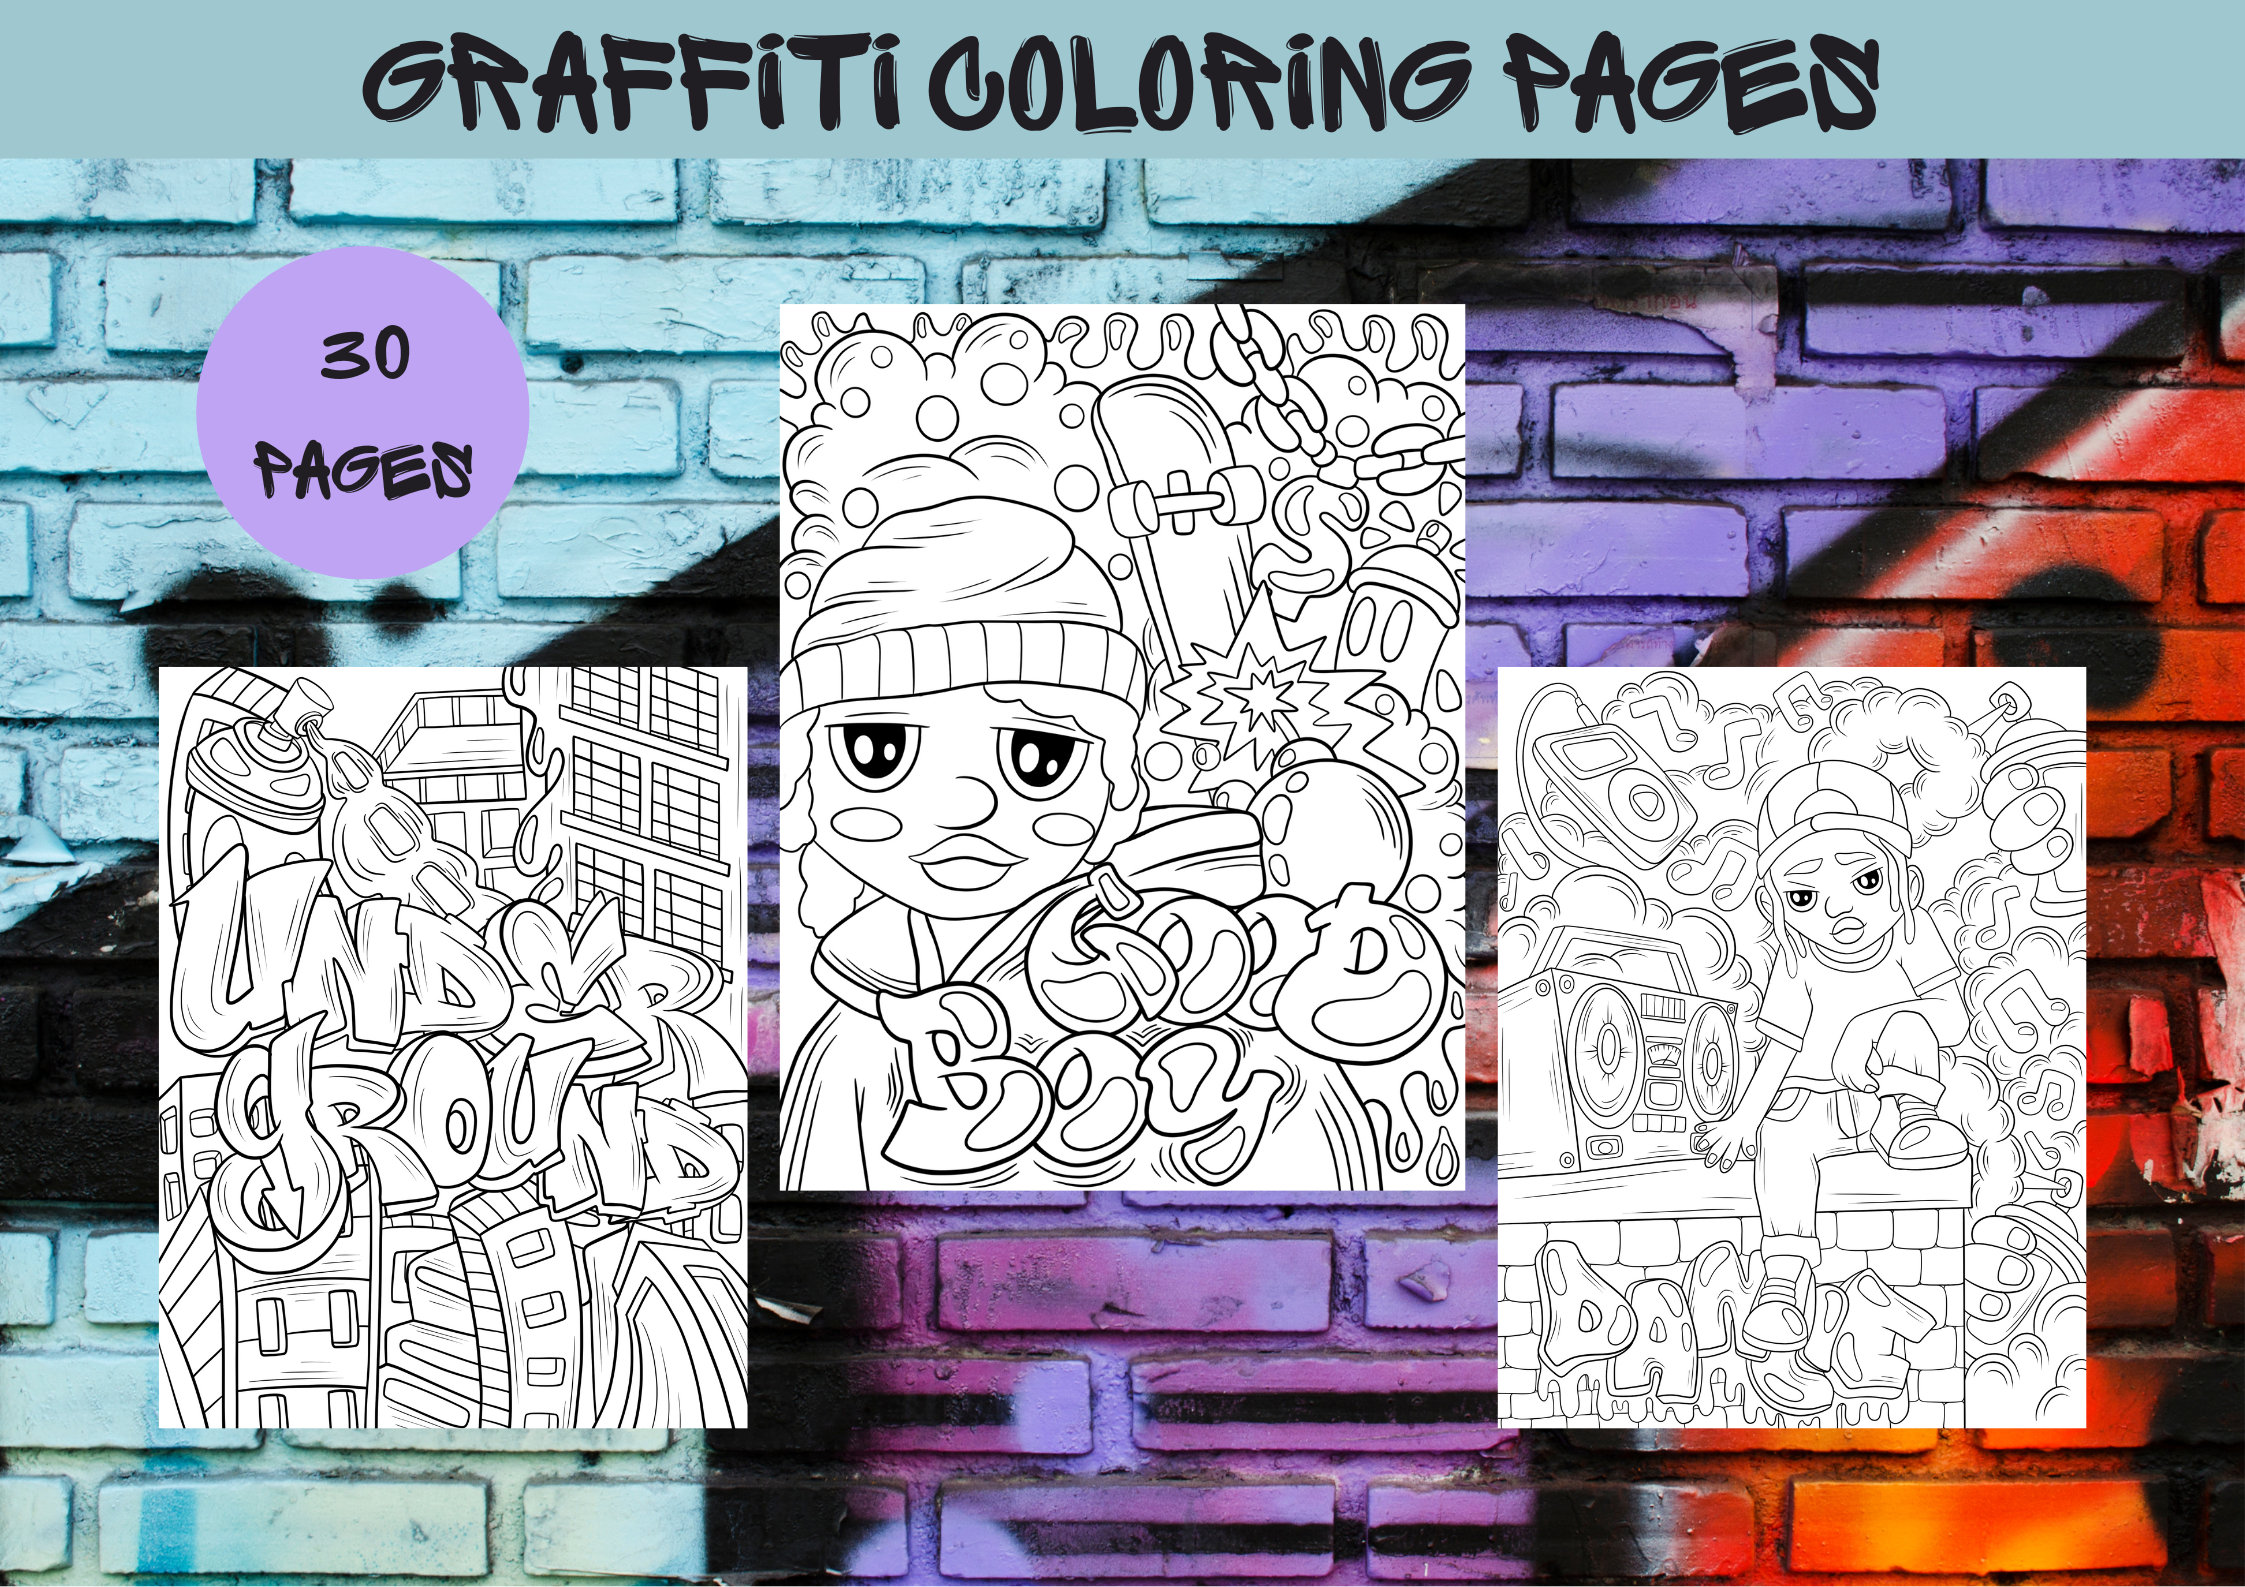 Graffiti Book: Over 100 Street Art Graffiti Coloring Pages for Teens and  Adults, Such As Drawings, Letters, Fonts, and More! 8.5 11in